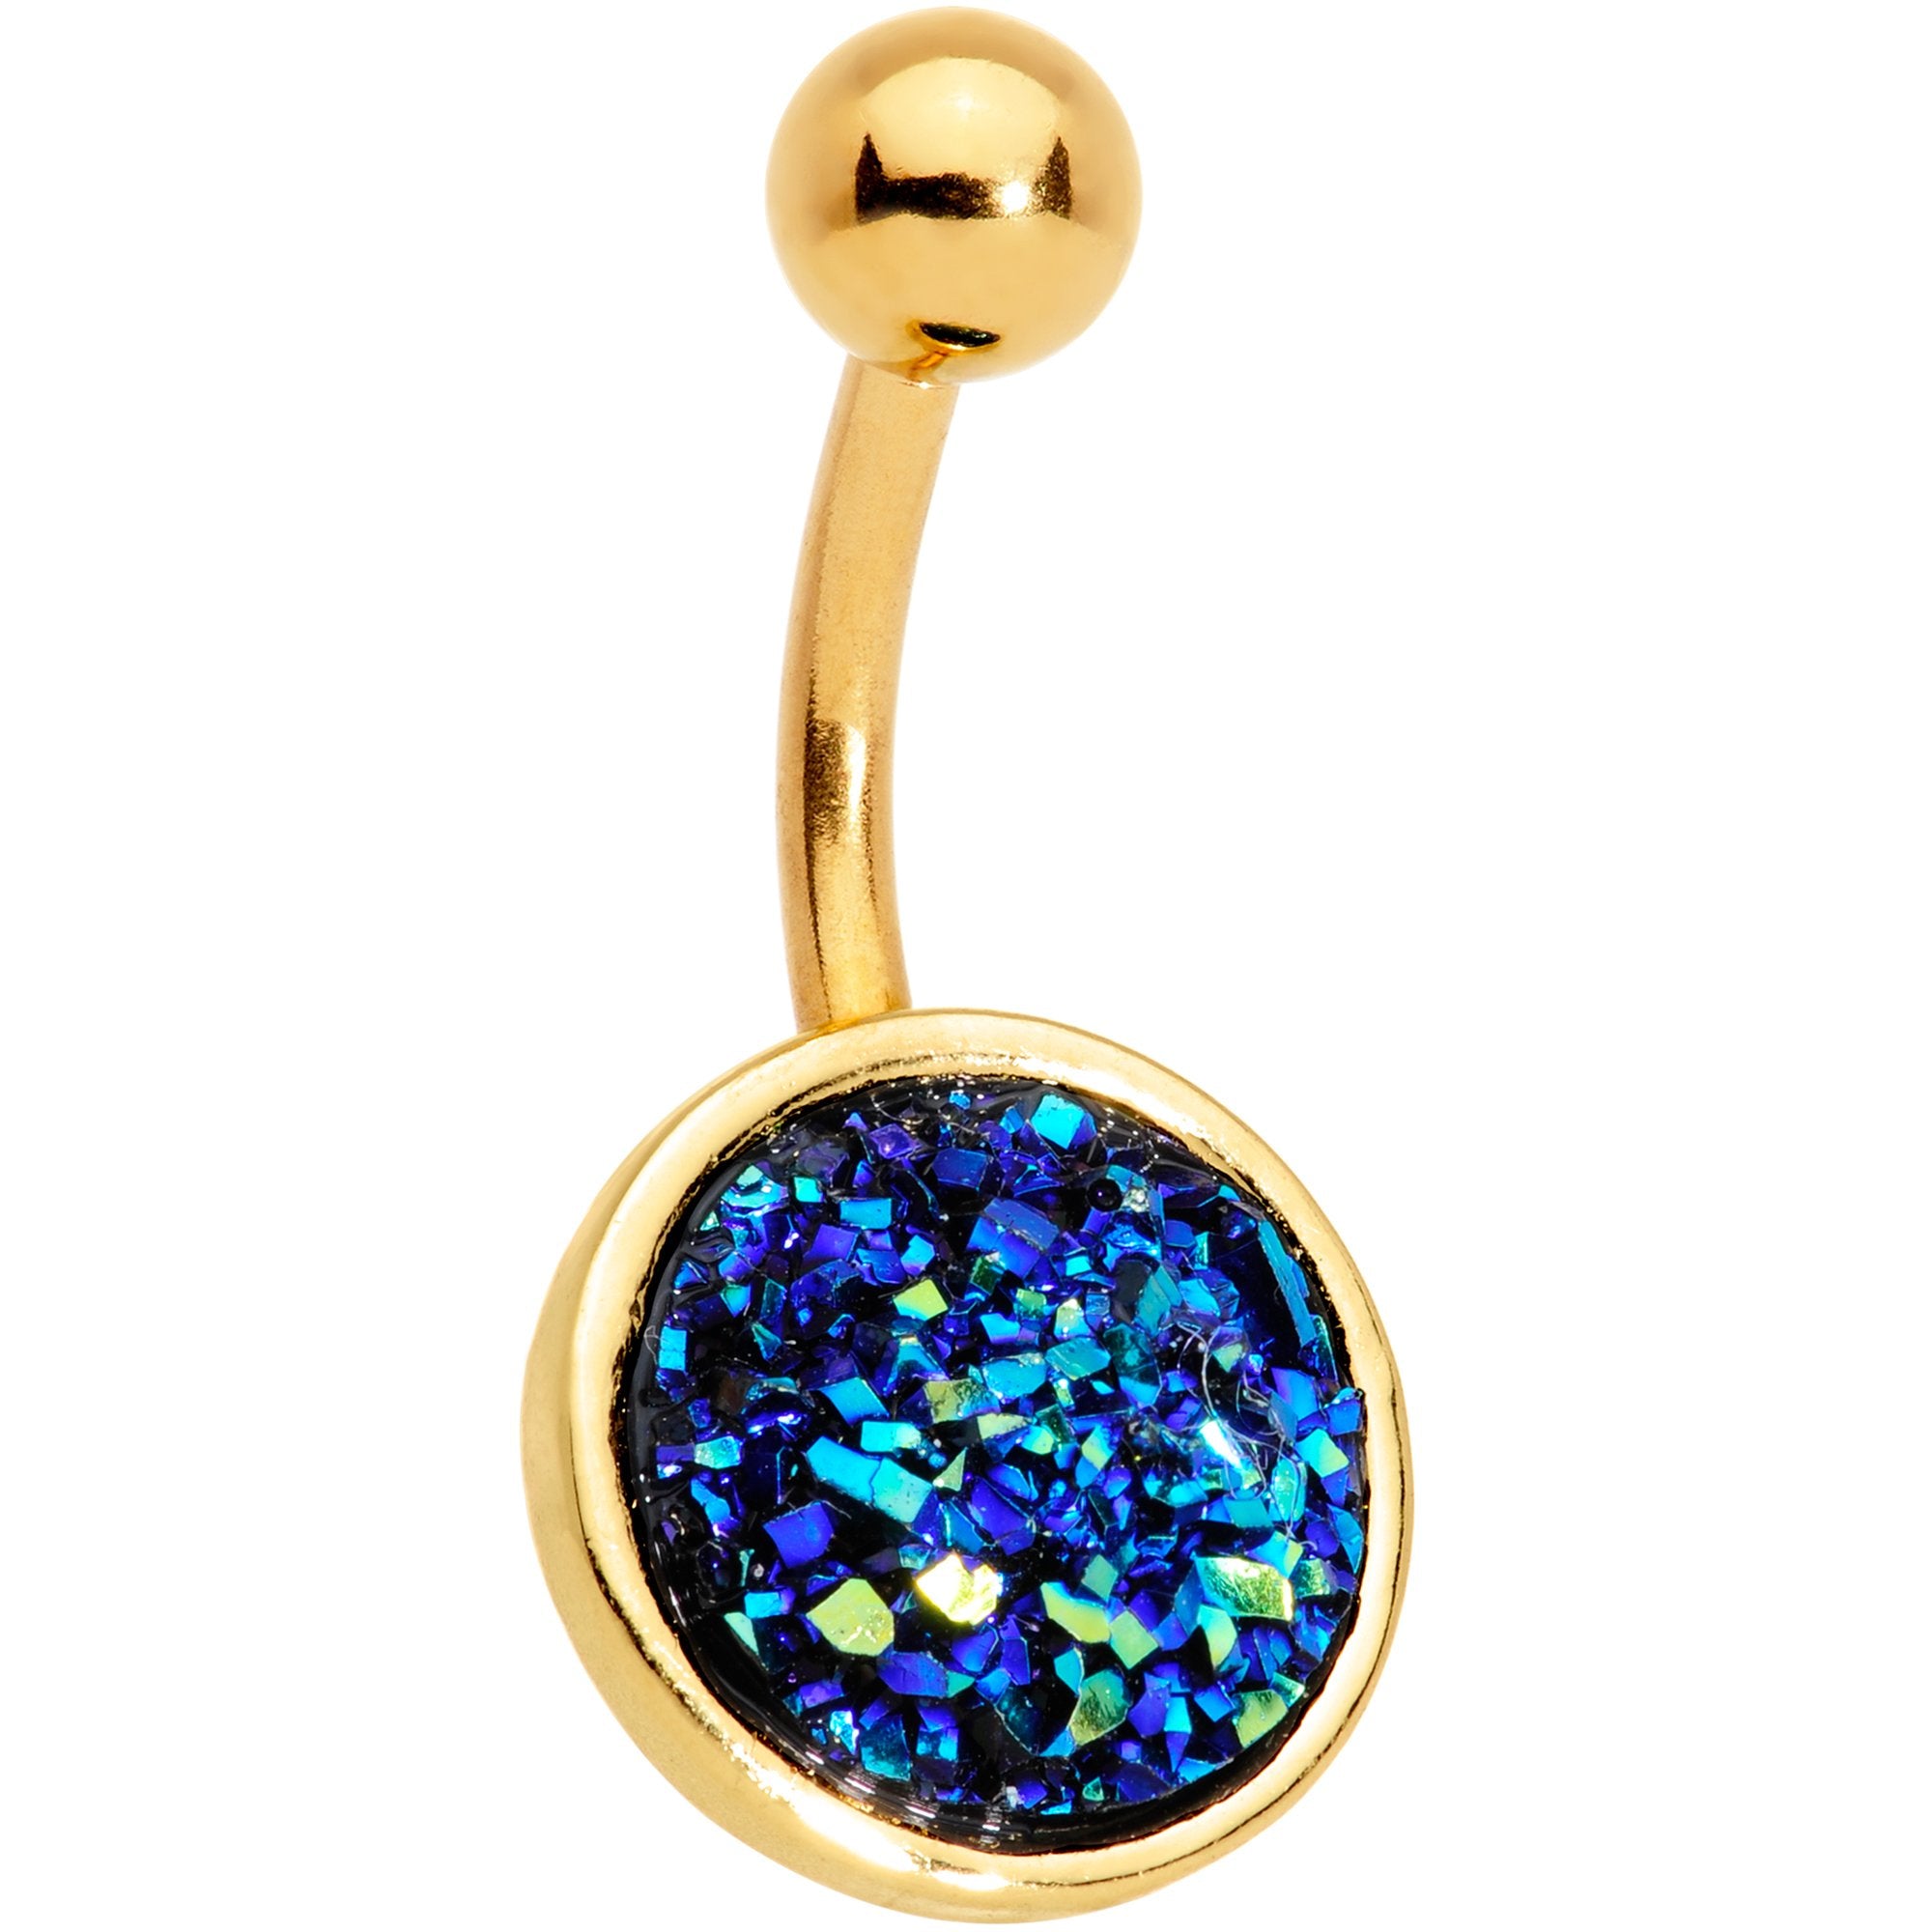 Clear Gem Blue Faux Druzy Gold Tone Belly Ring Set of 4